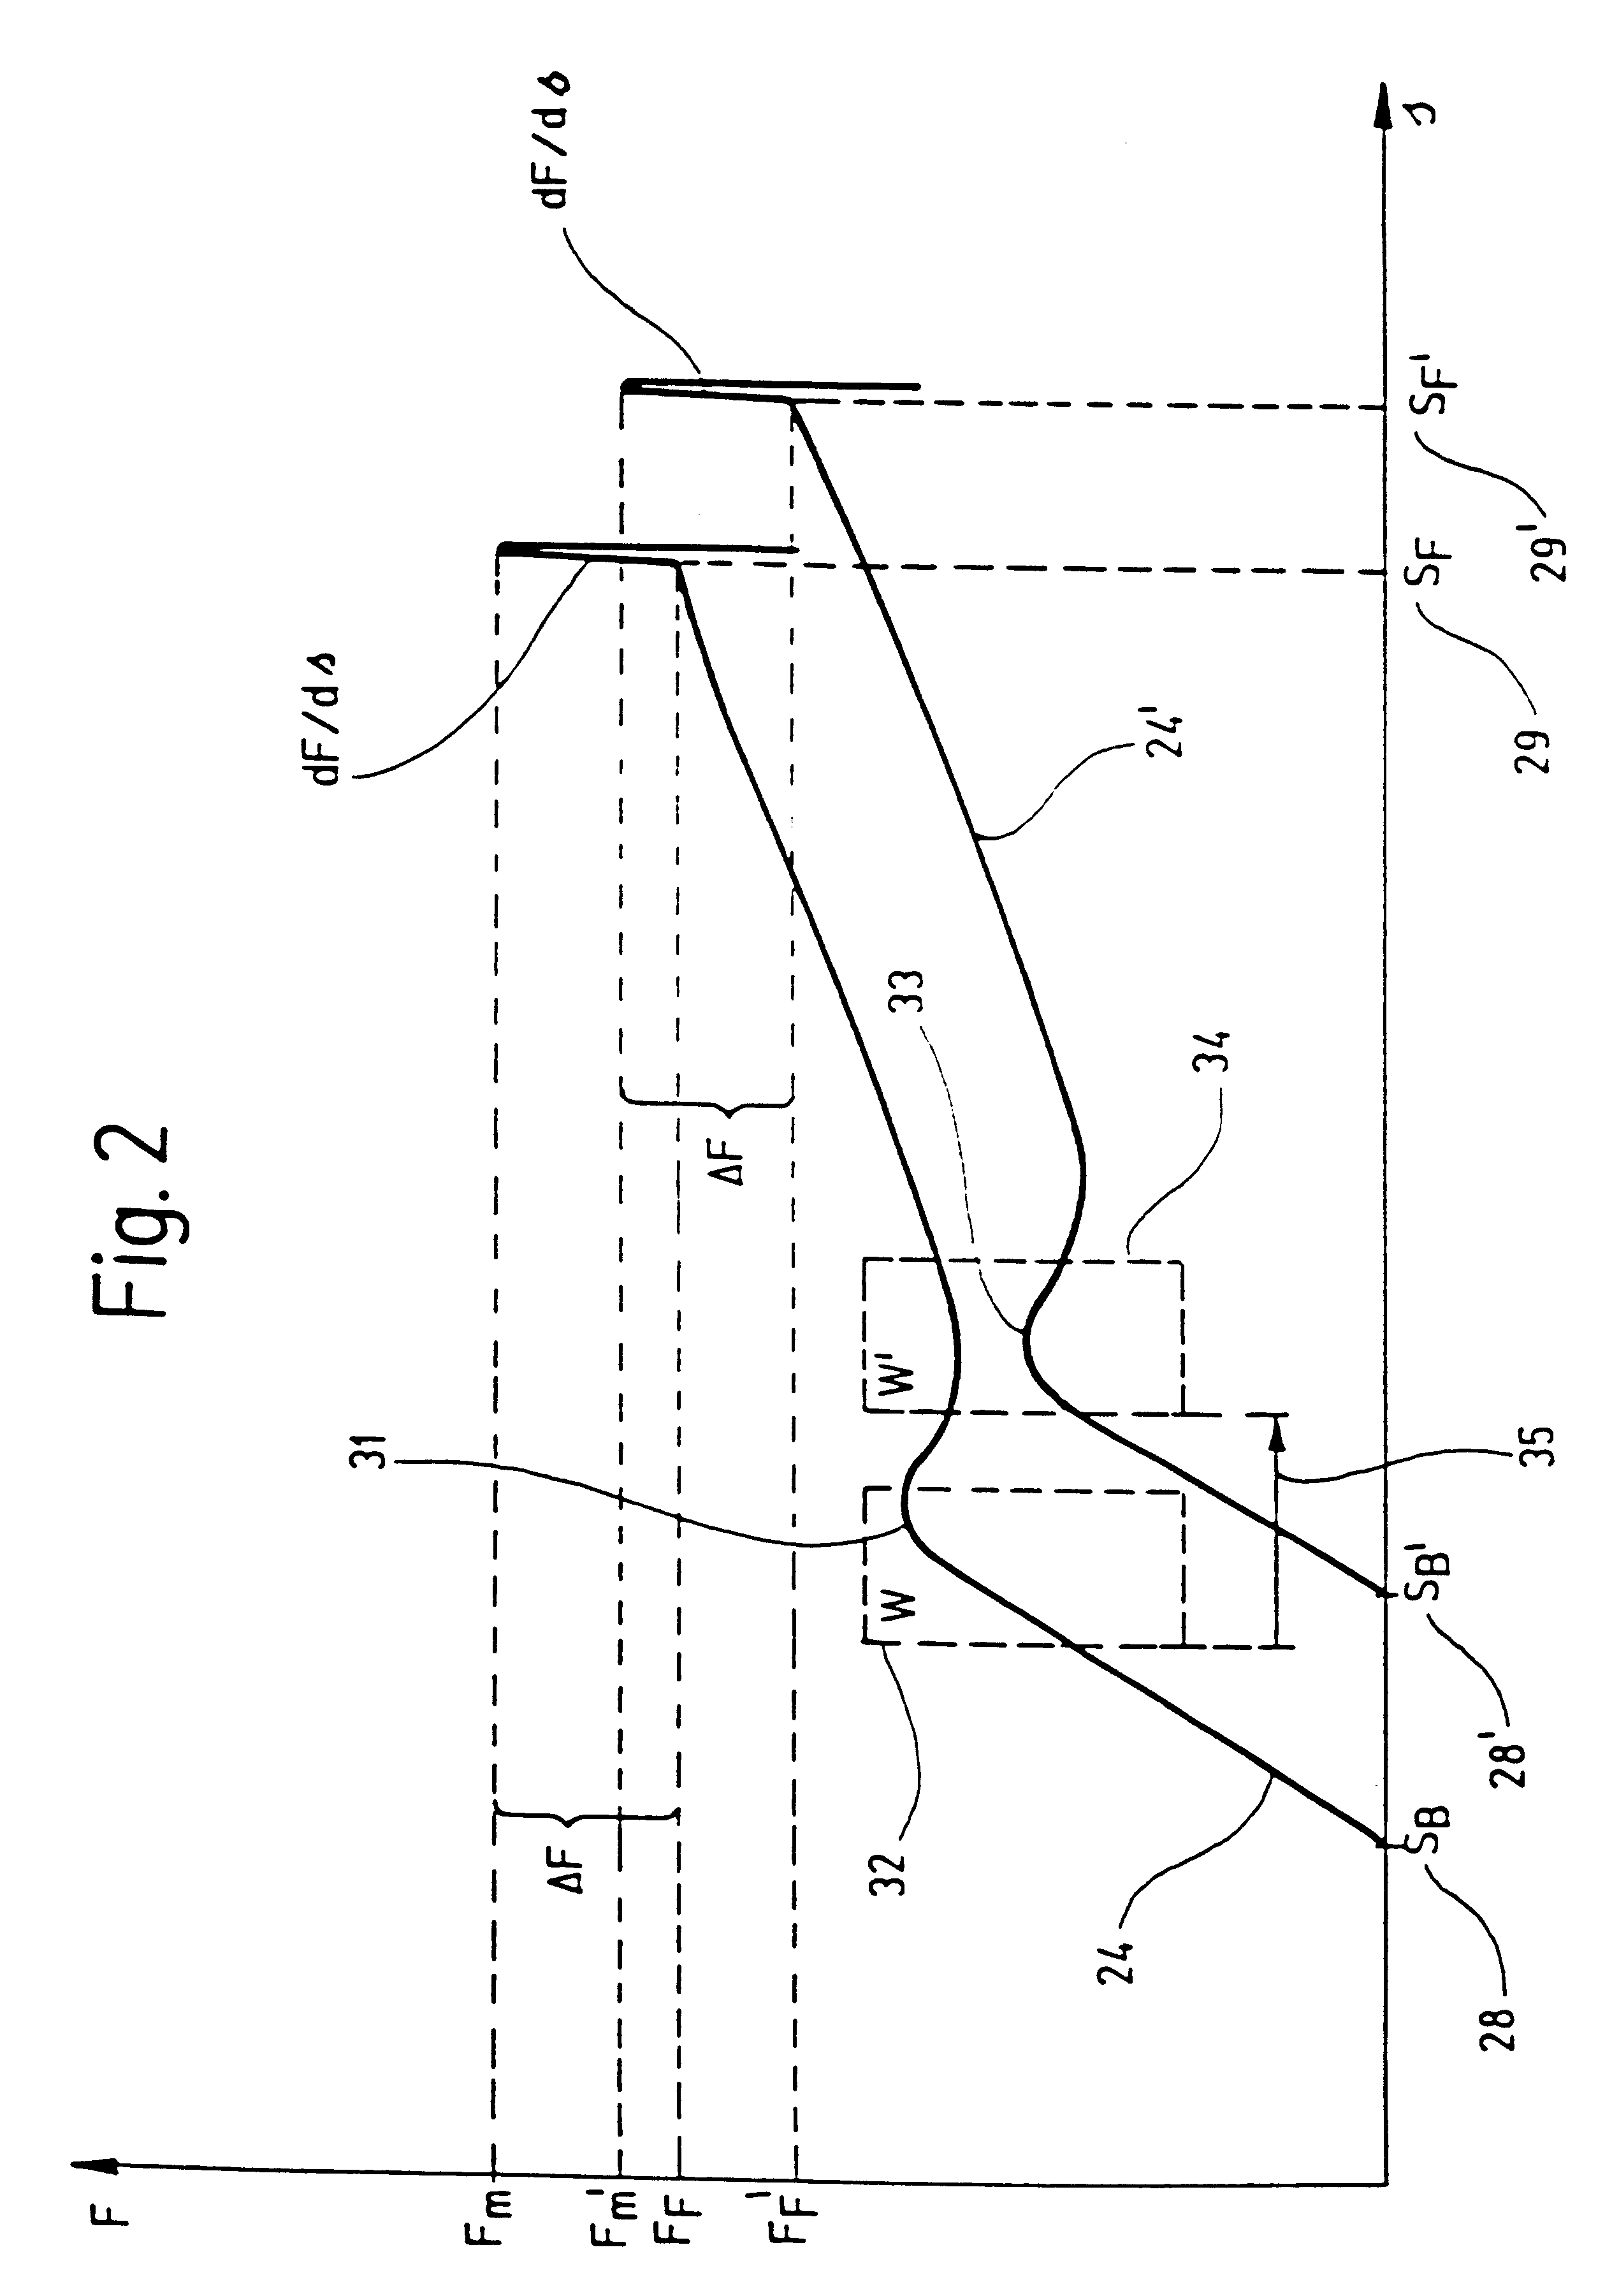 Method for operating an electric press